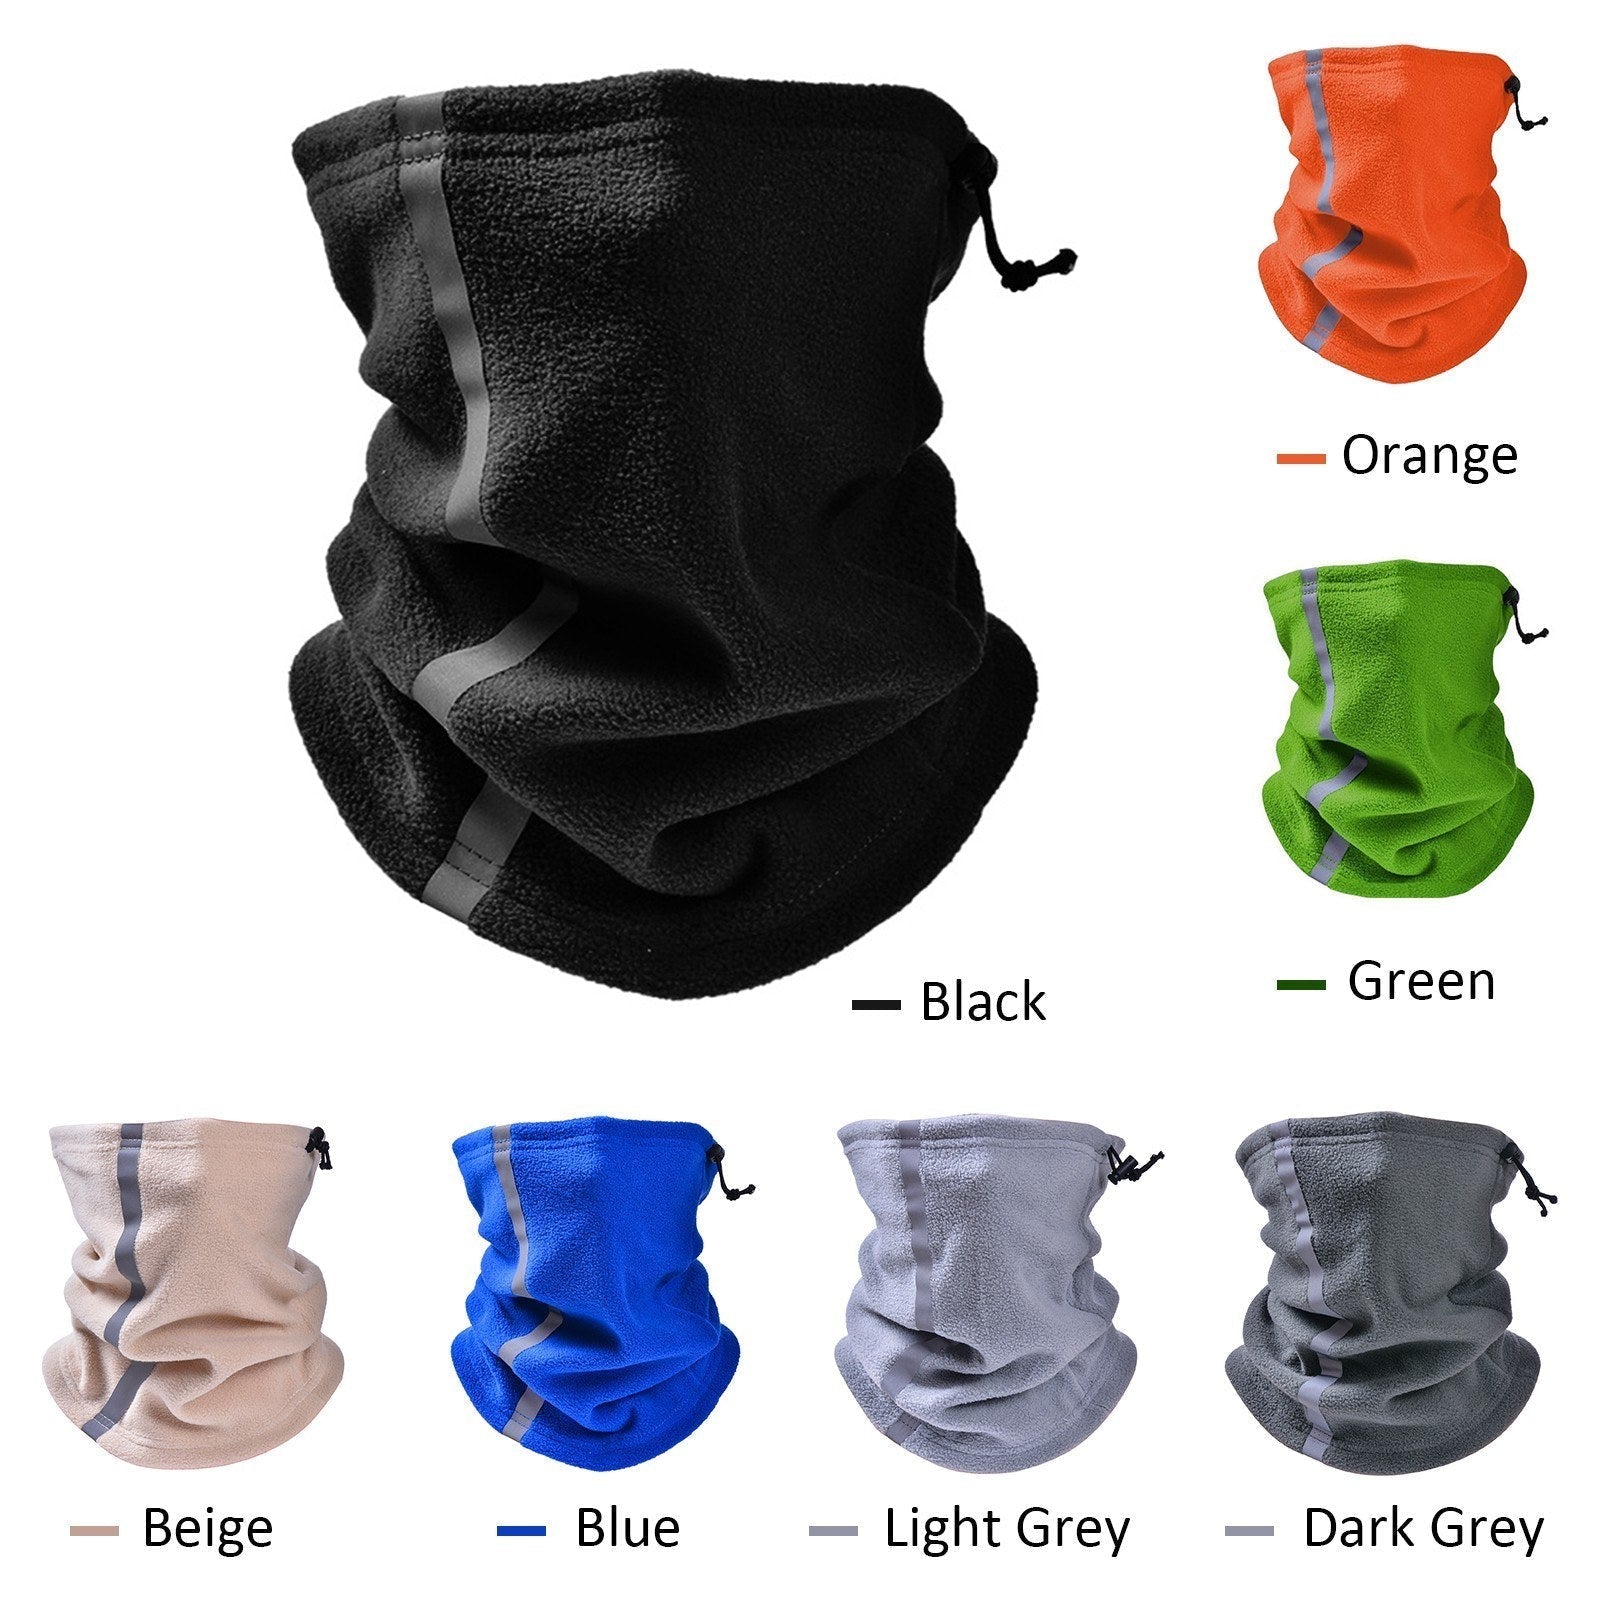 Adjustable Fleece Neck Gaiter Warmer Reflective Safety Face Cover Balaclava Winter Warm Outdoor Sport Scarf for Men and Women Skiing Cycling Running